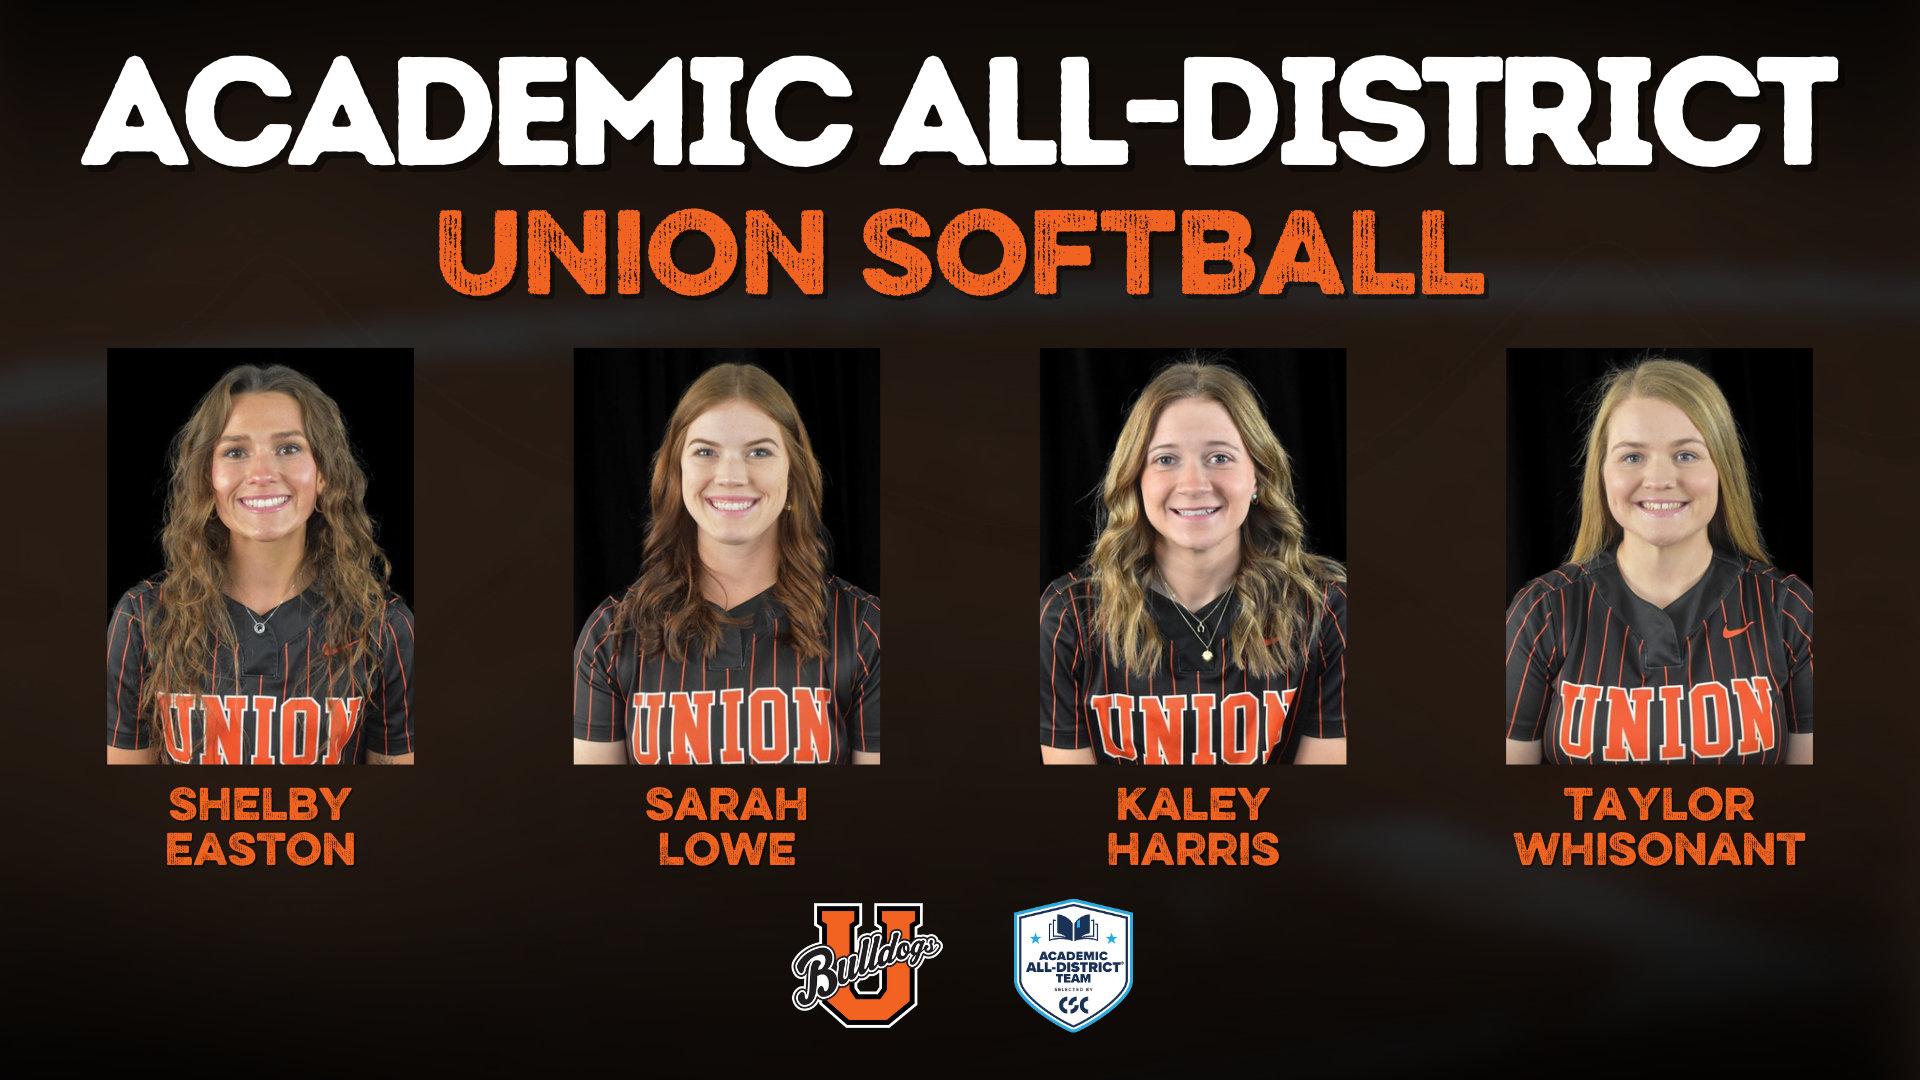 Four Union softball players named to CSC Academic All-District Team